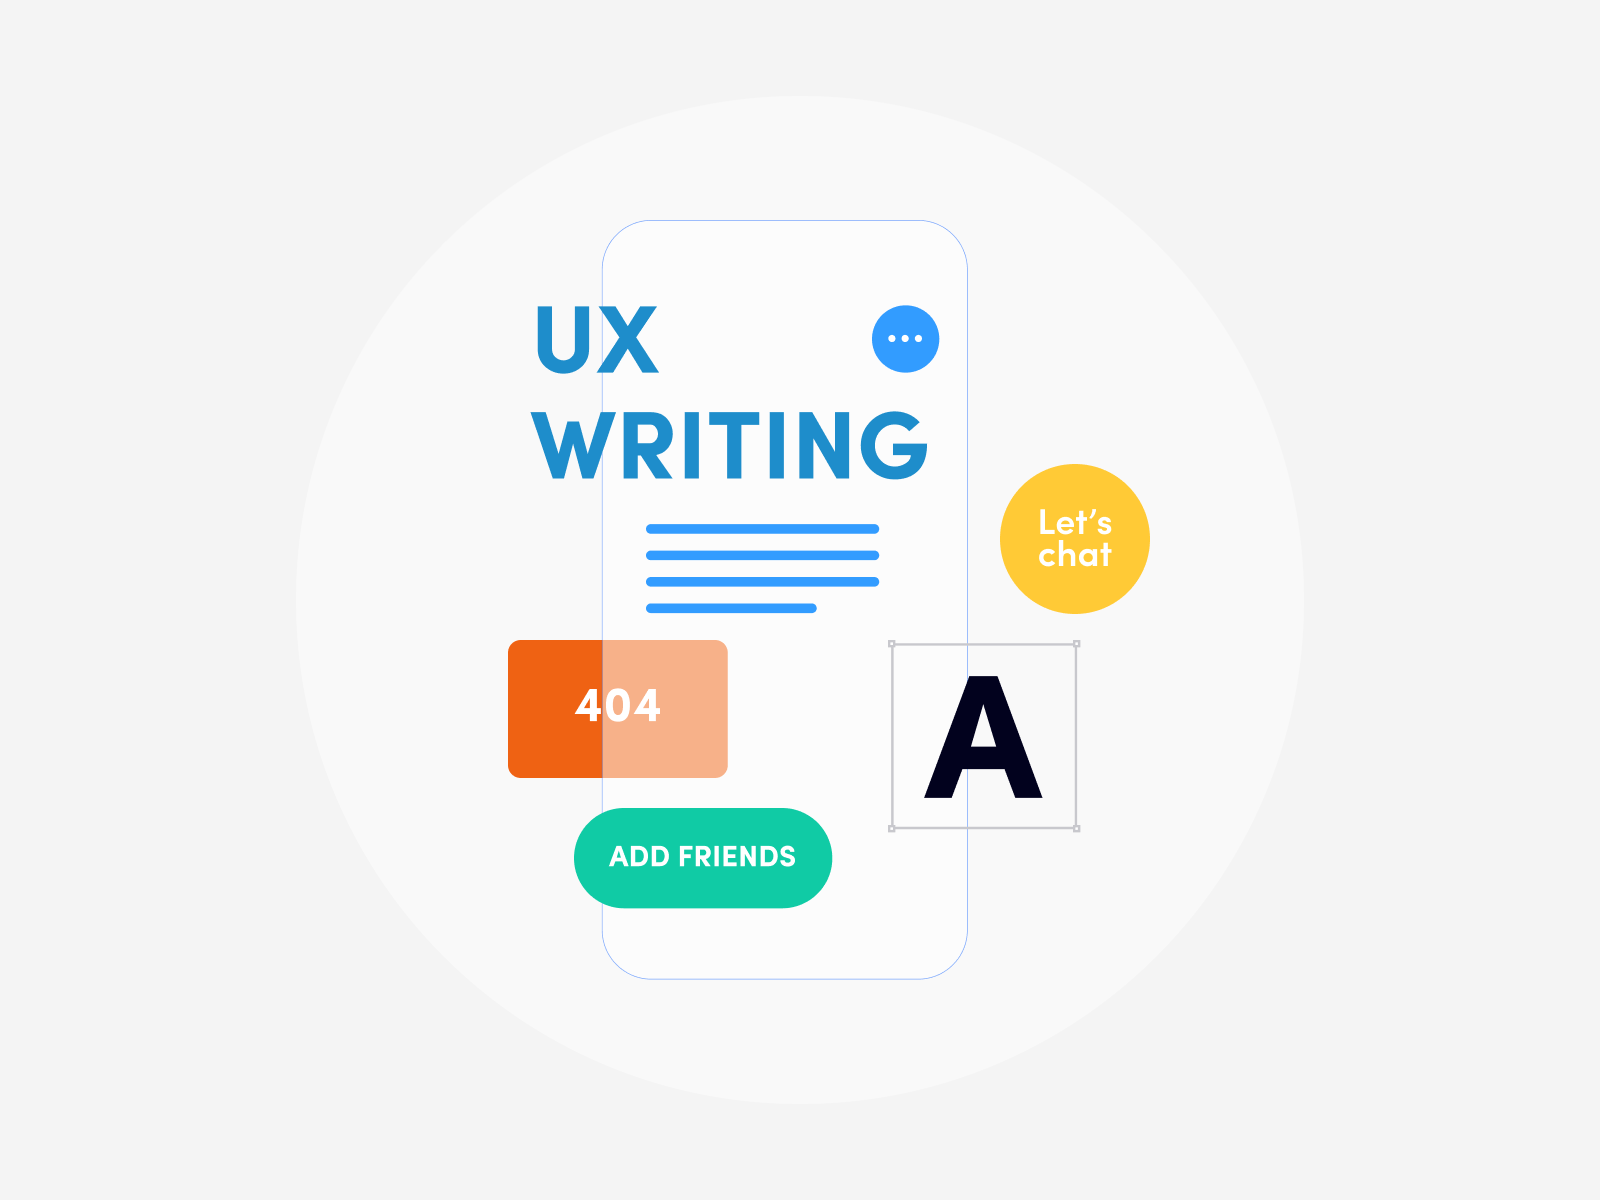 The point of UX writing is to improve user experience